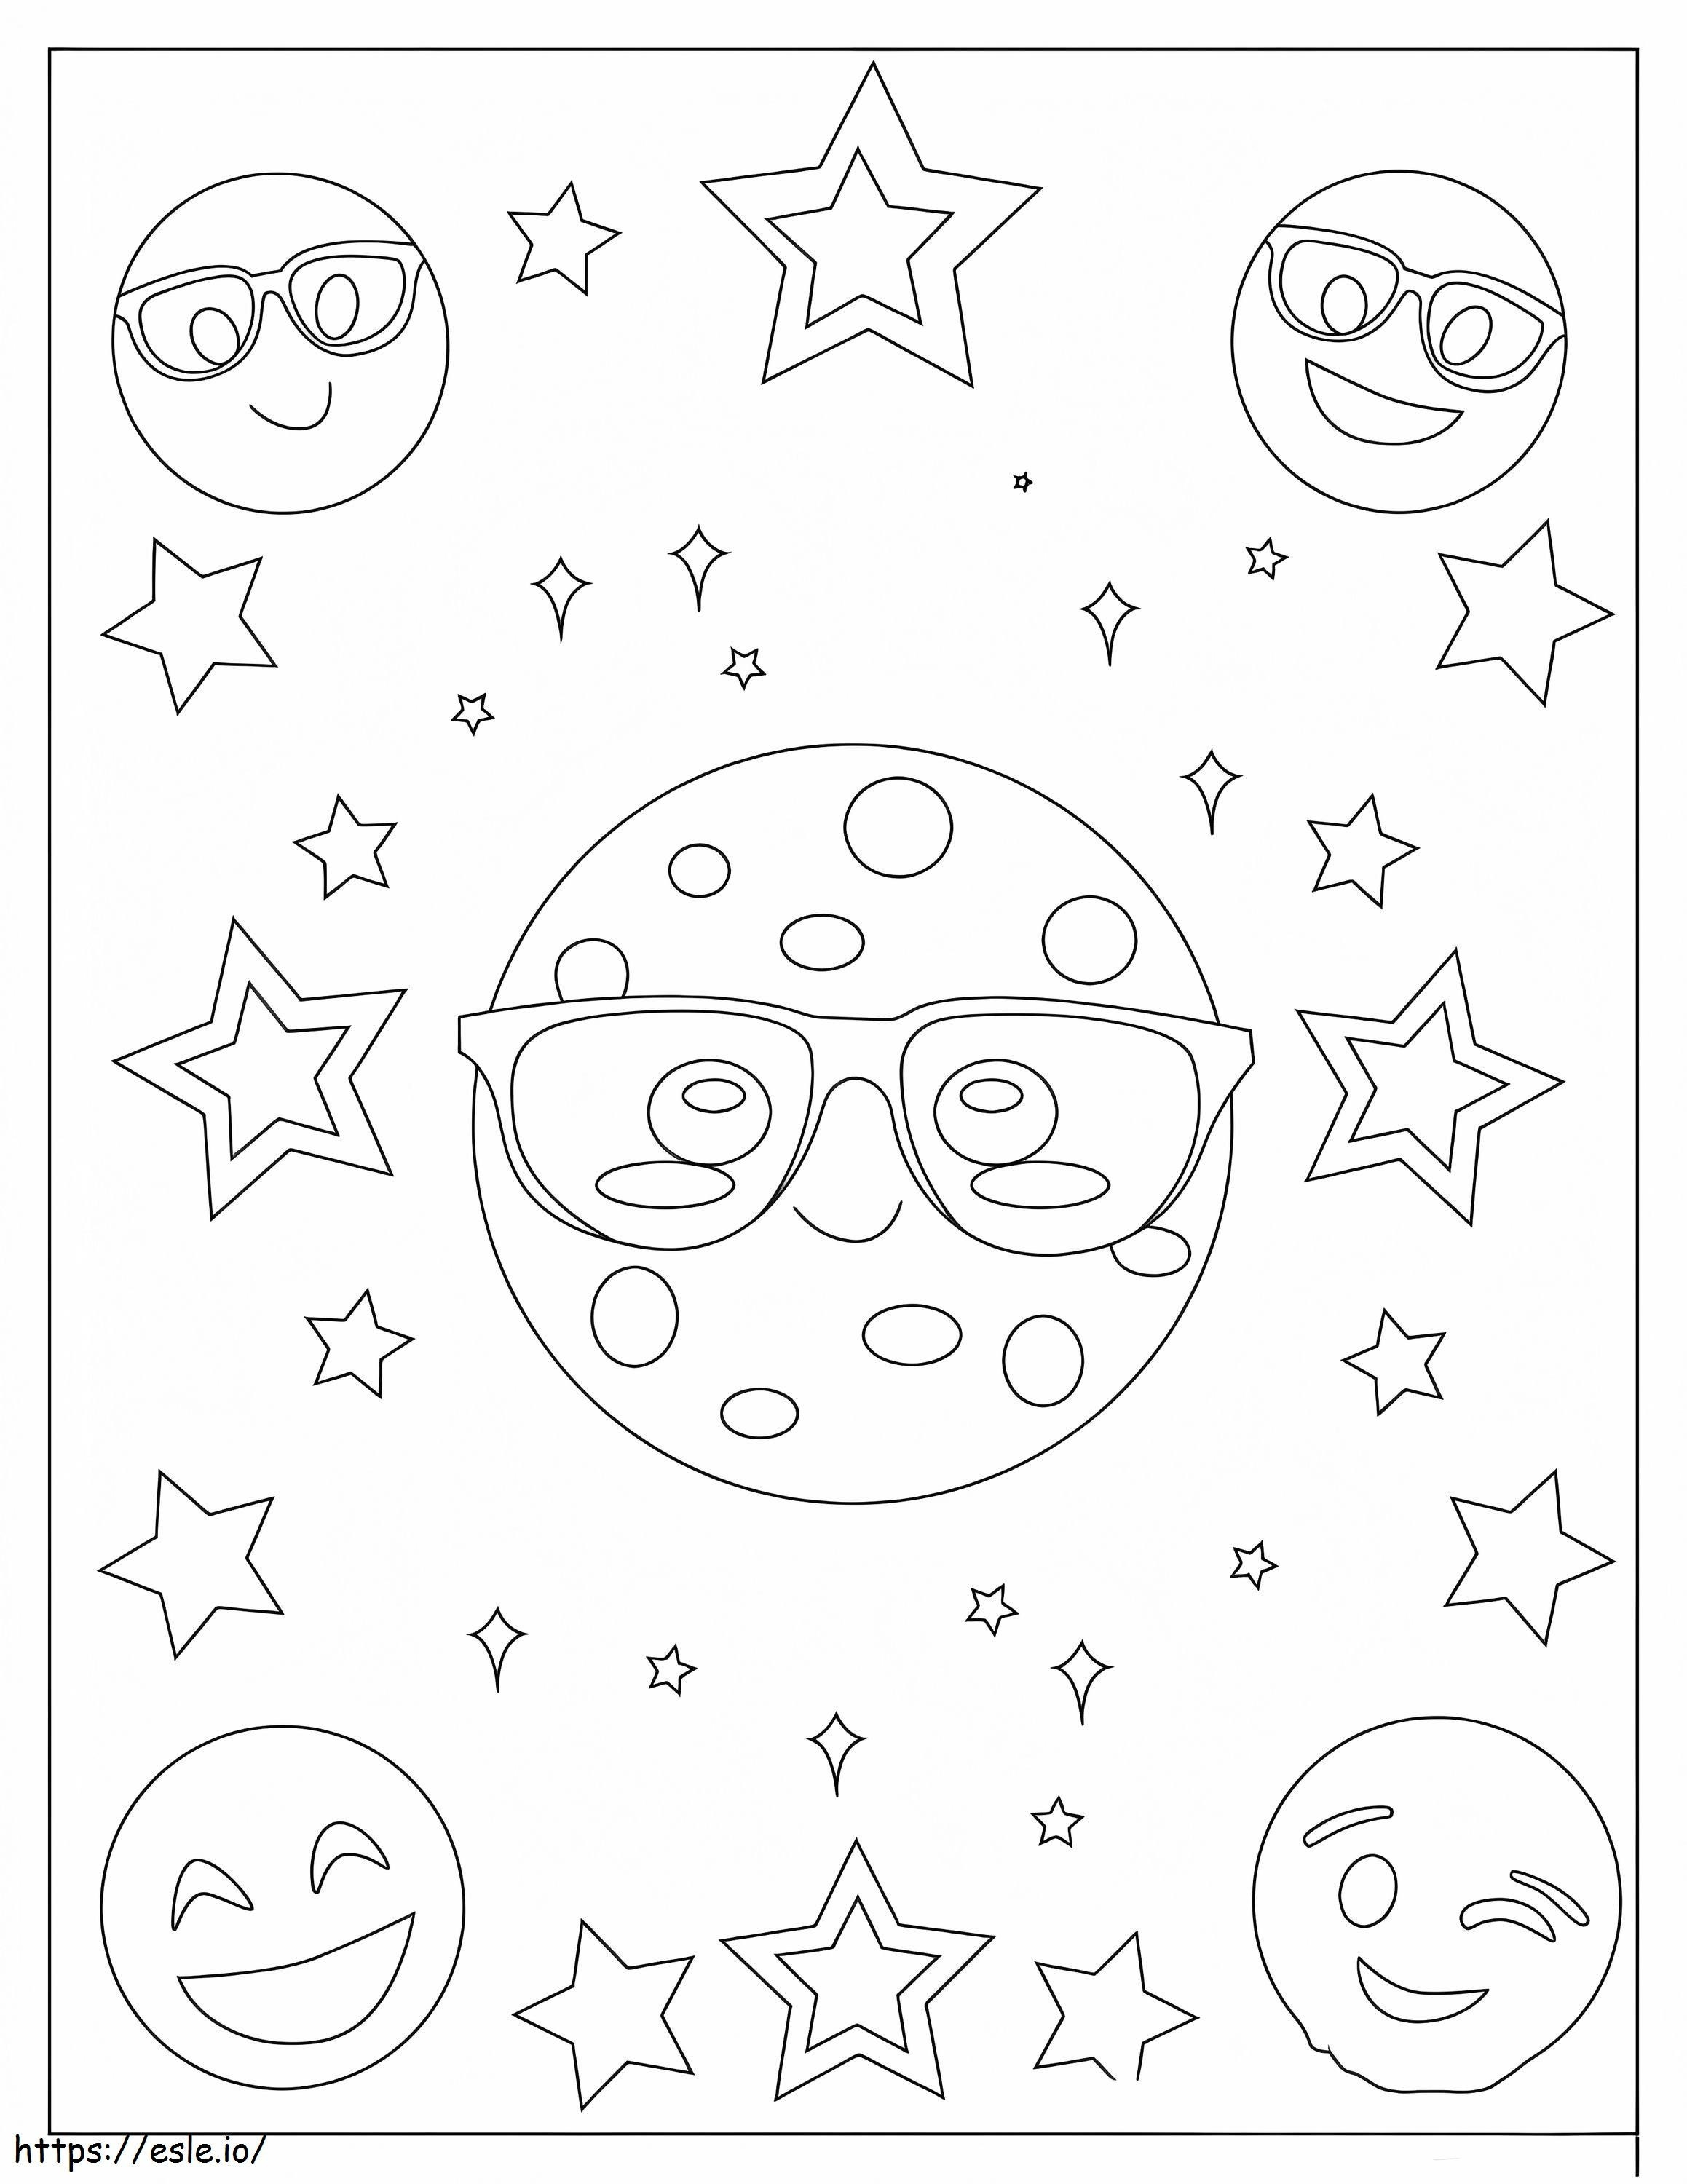 Five Emoji With Star coloring page